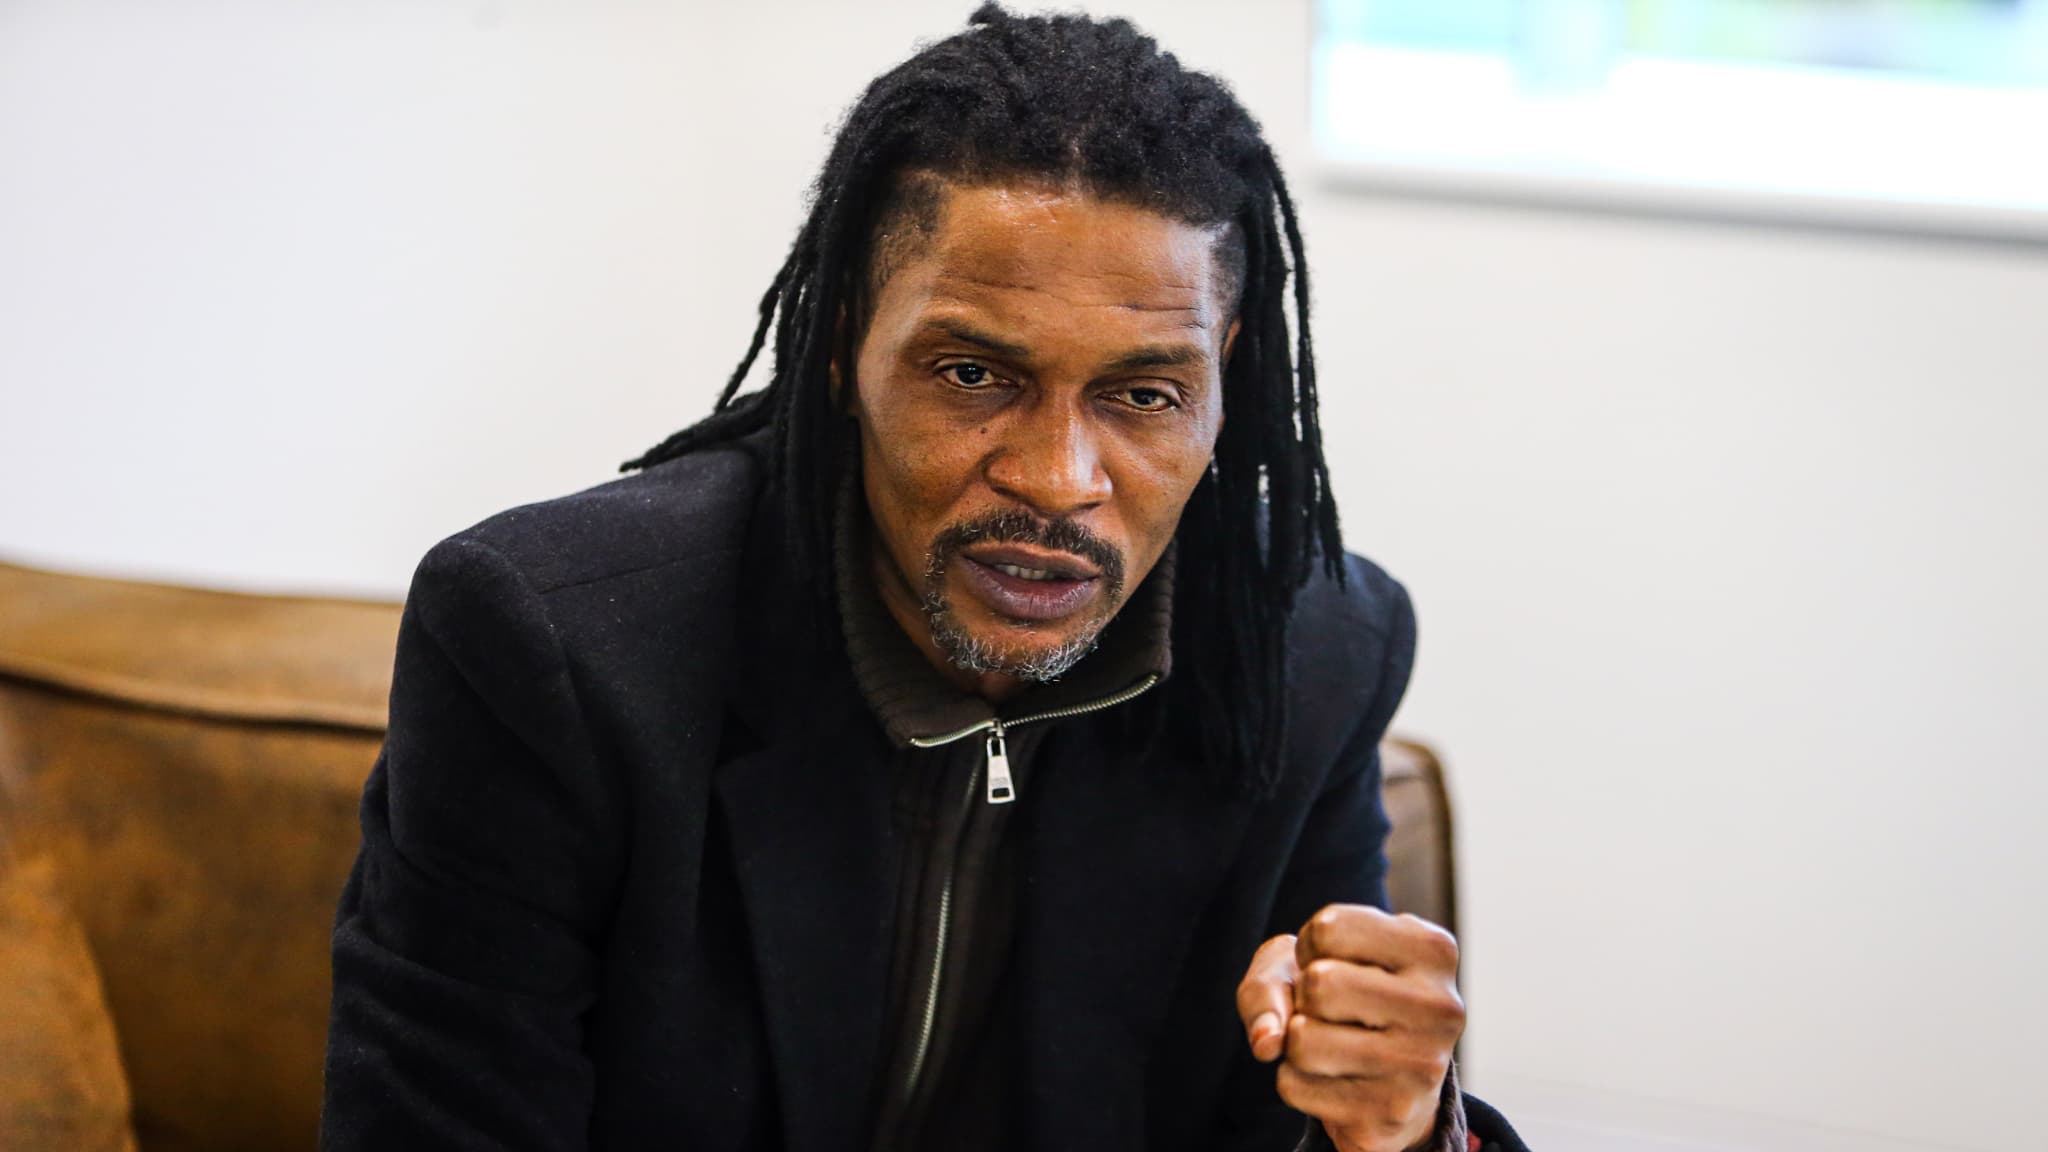 Rigobert Song is the new coach of the Indomitable Lions